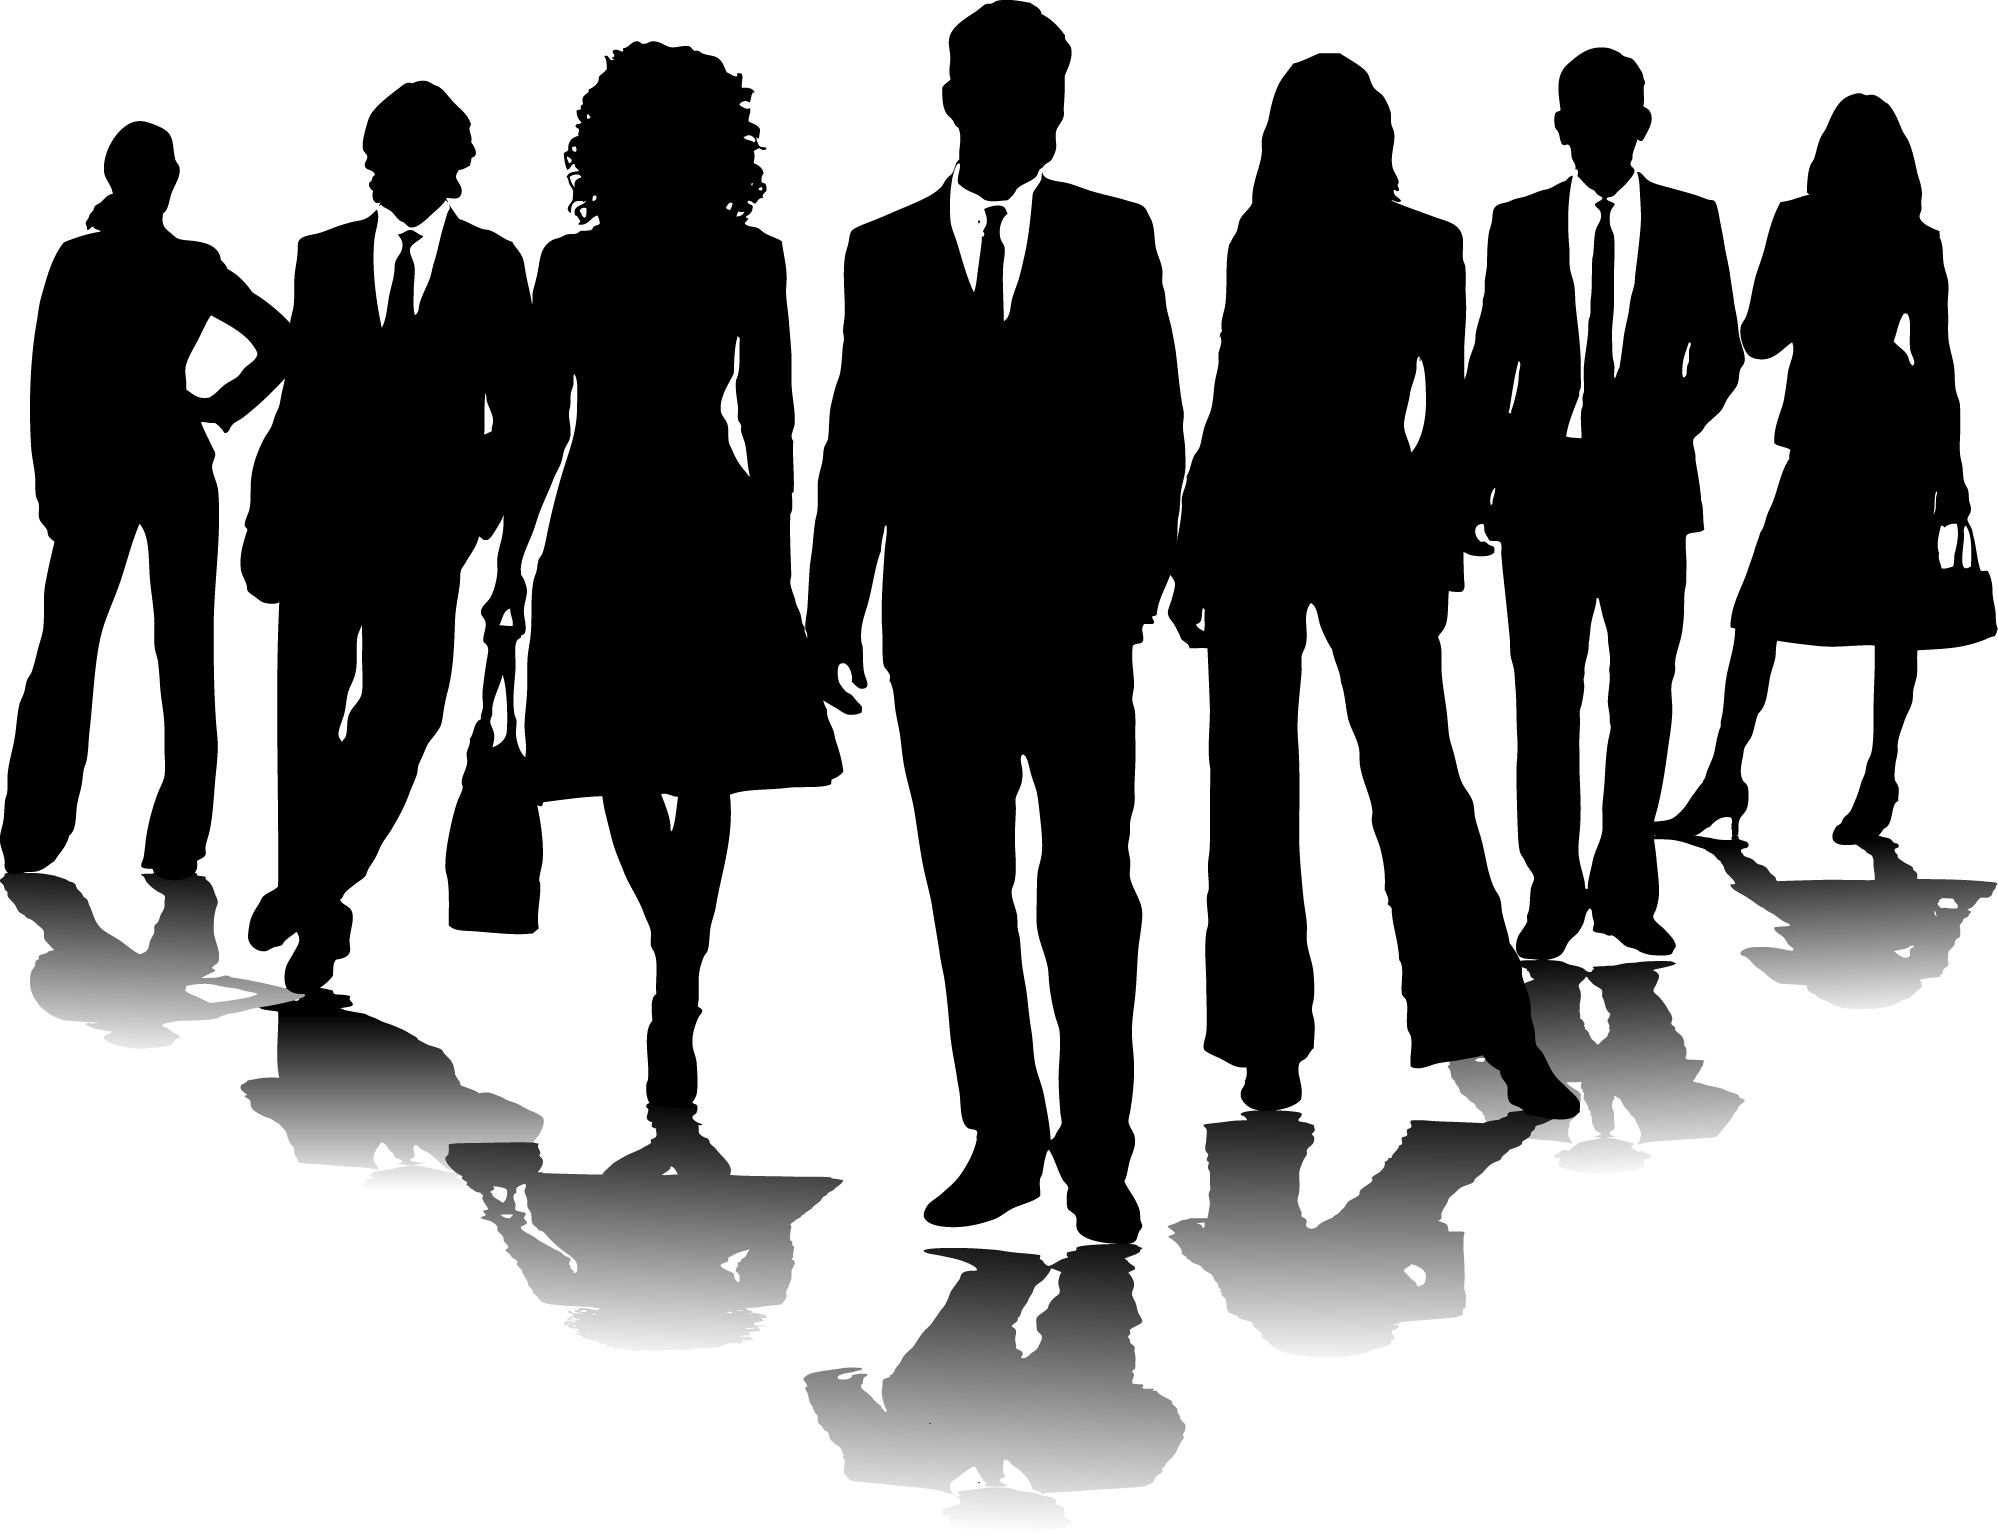 Clipart Business People - Clipart Of People